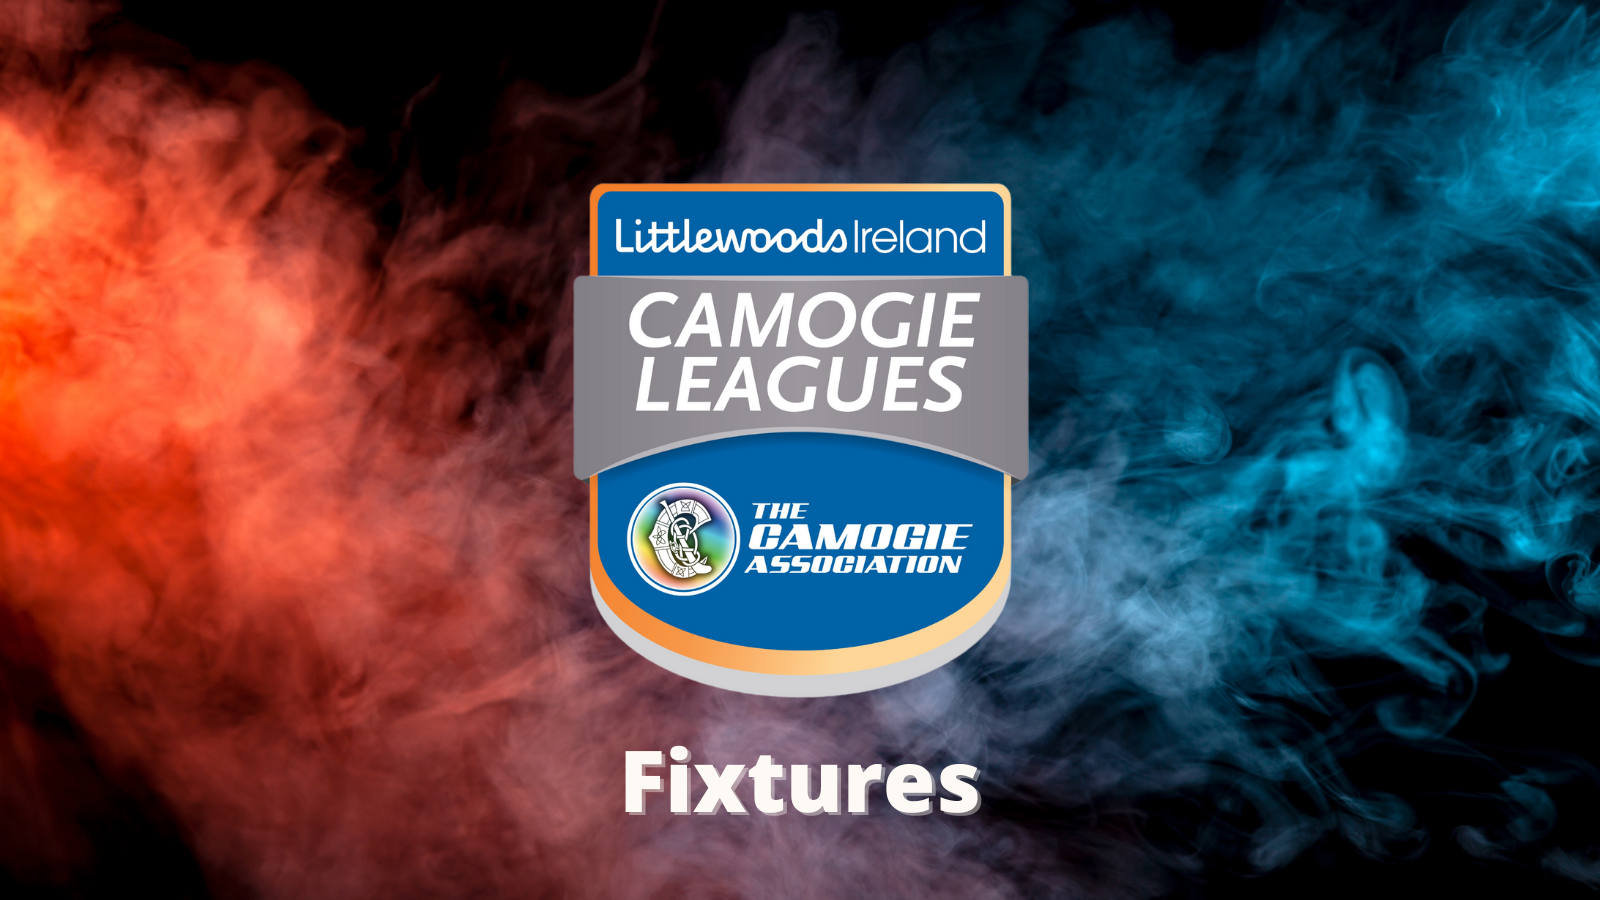 FIXTURES: Littlewoods Ireland Camogie Leagues, 26th February